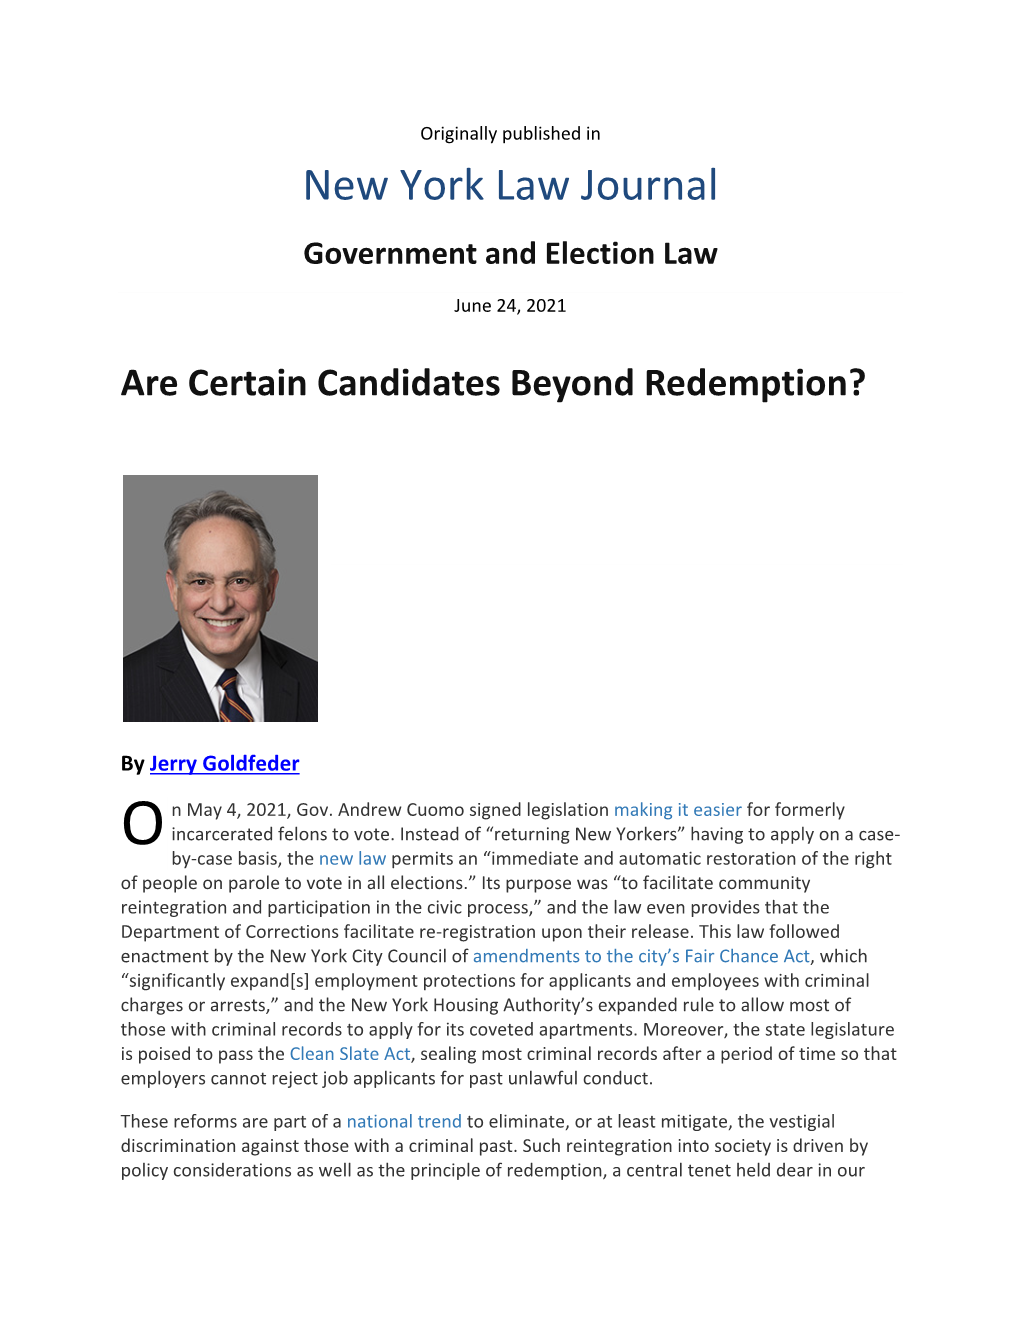 New York Law Journal Government and Election Law